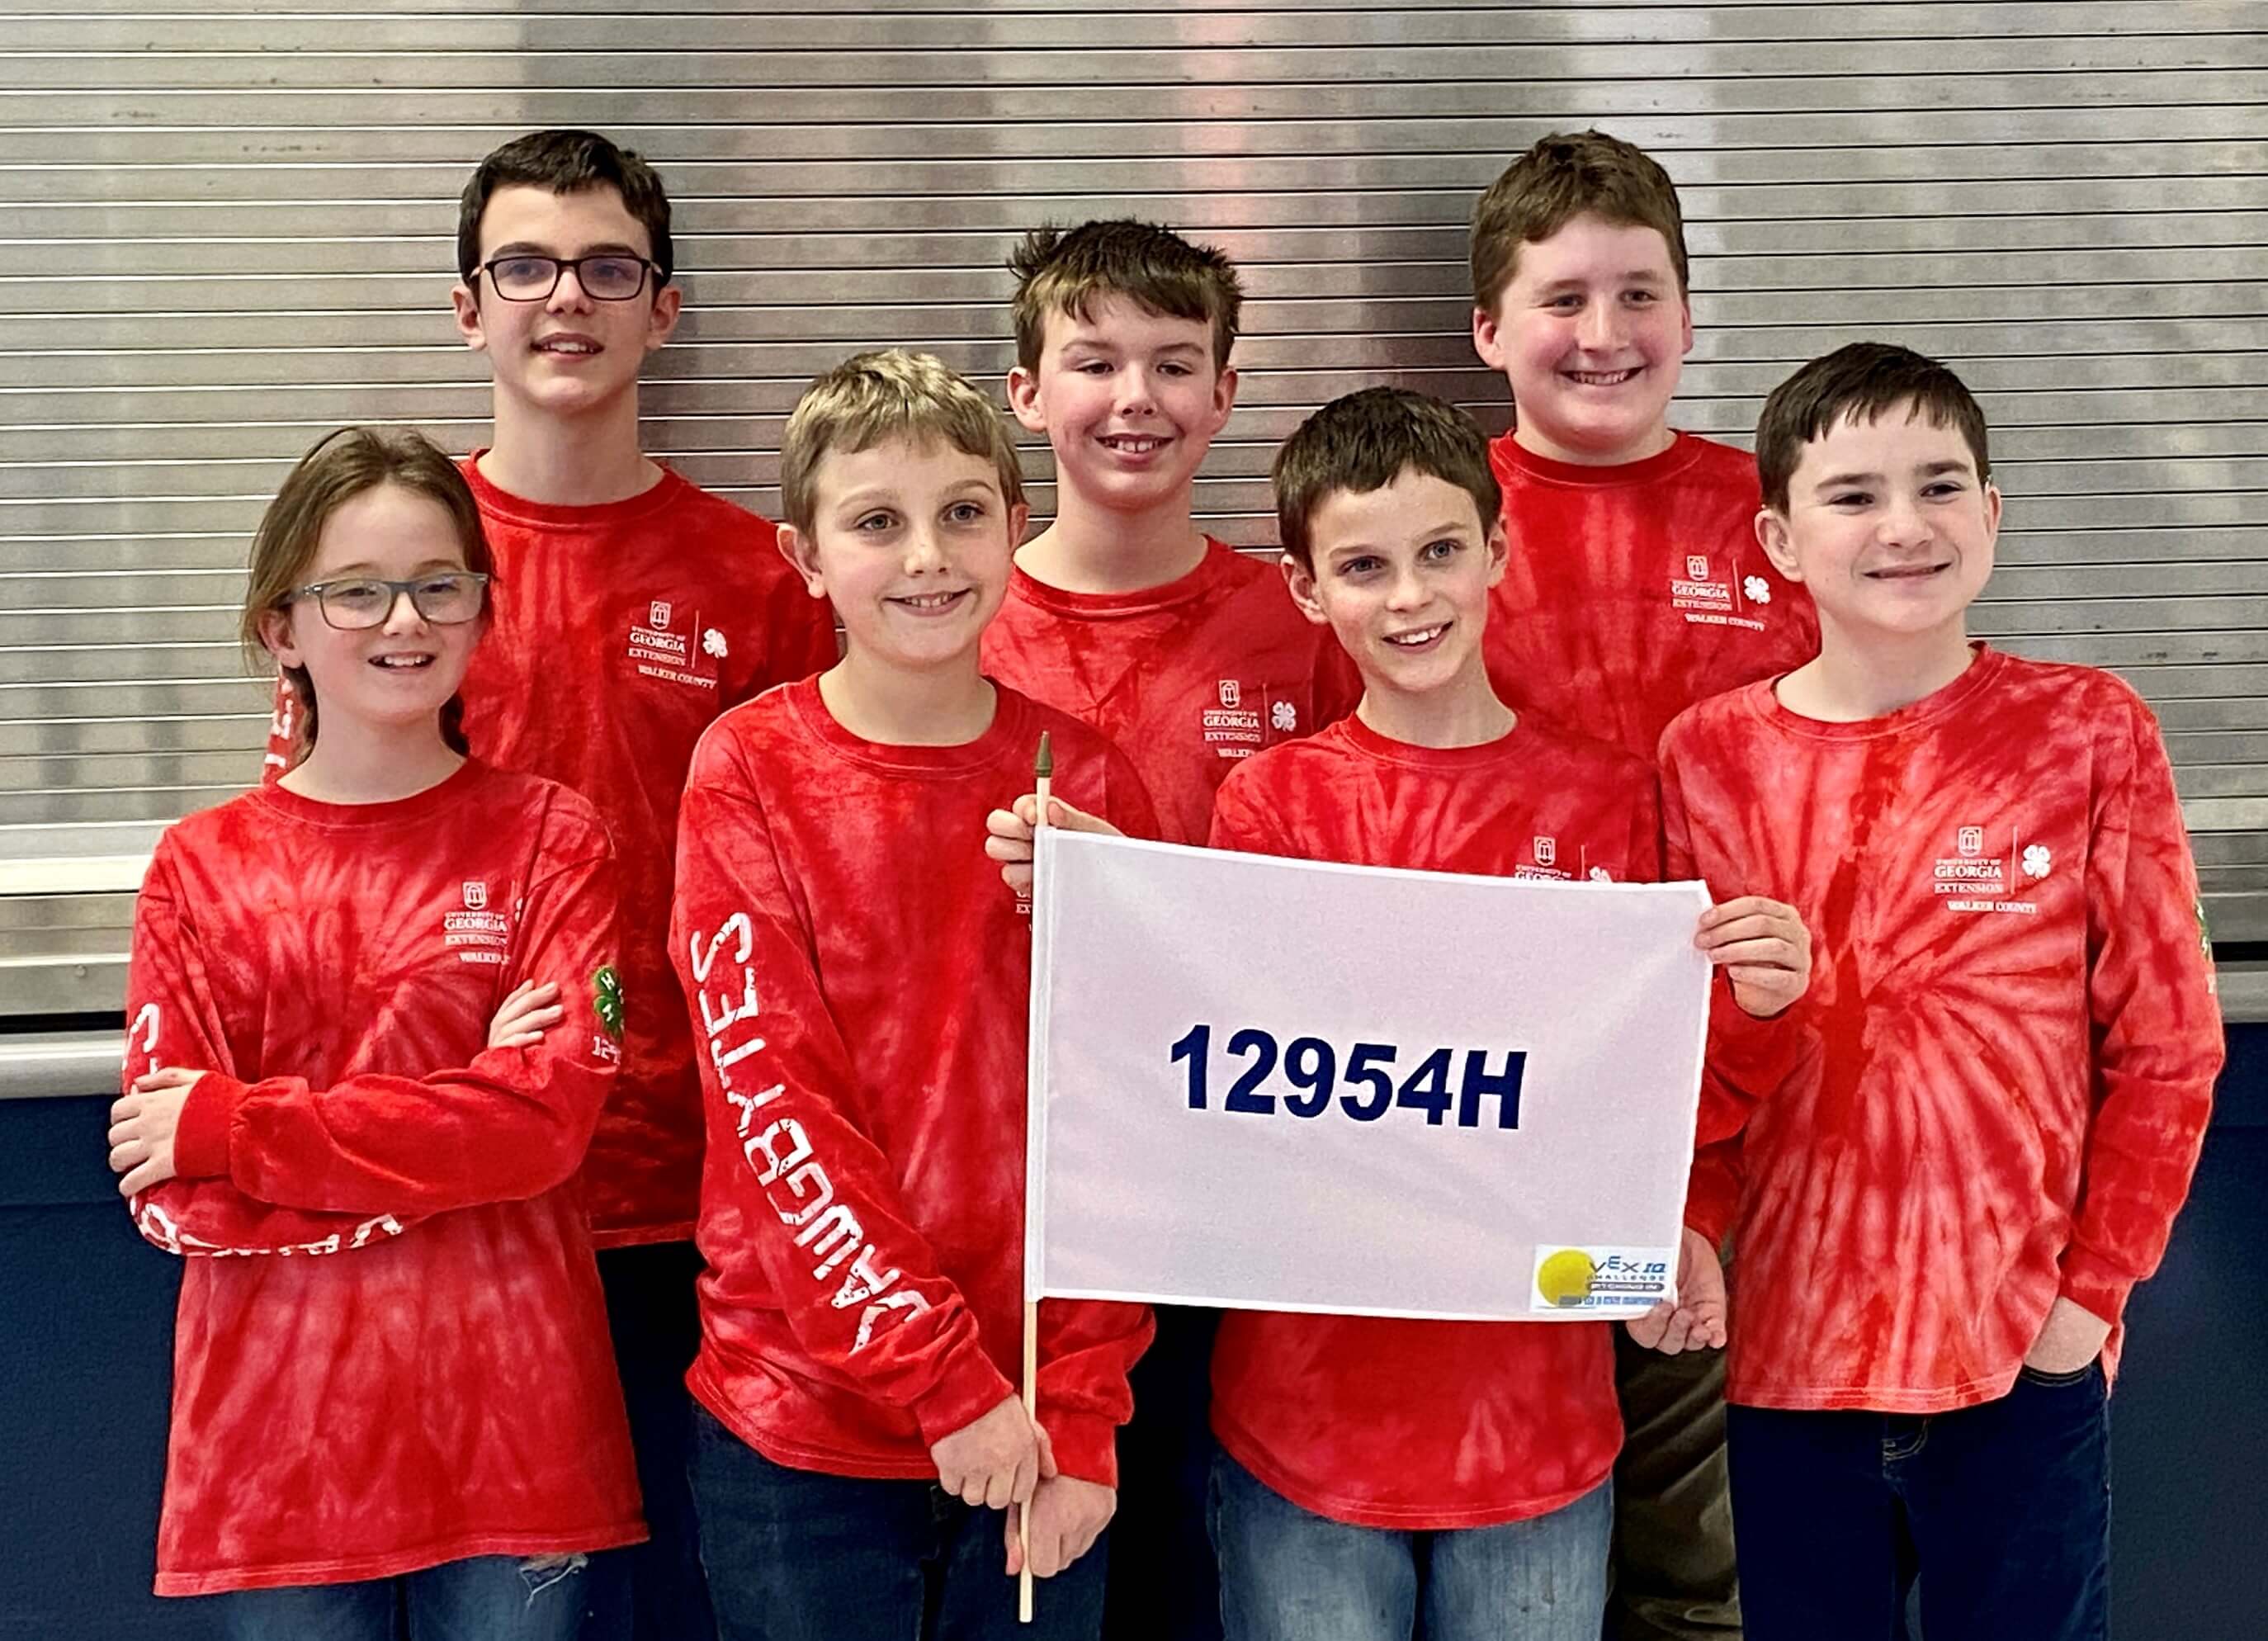 The Walker County Robotics Team from Georgia 4-H poses with a flag while wearing matching red tie-dye "Dawgbytes" shirts.